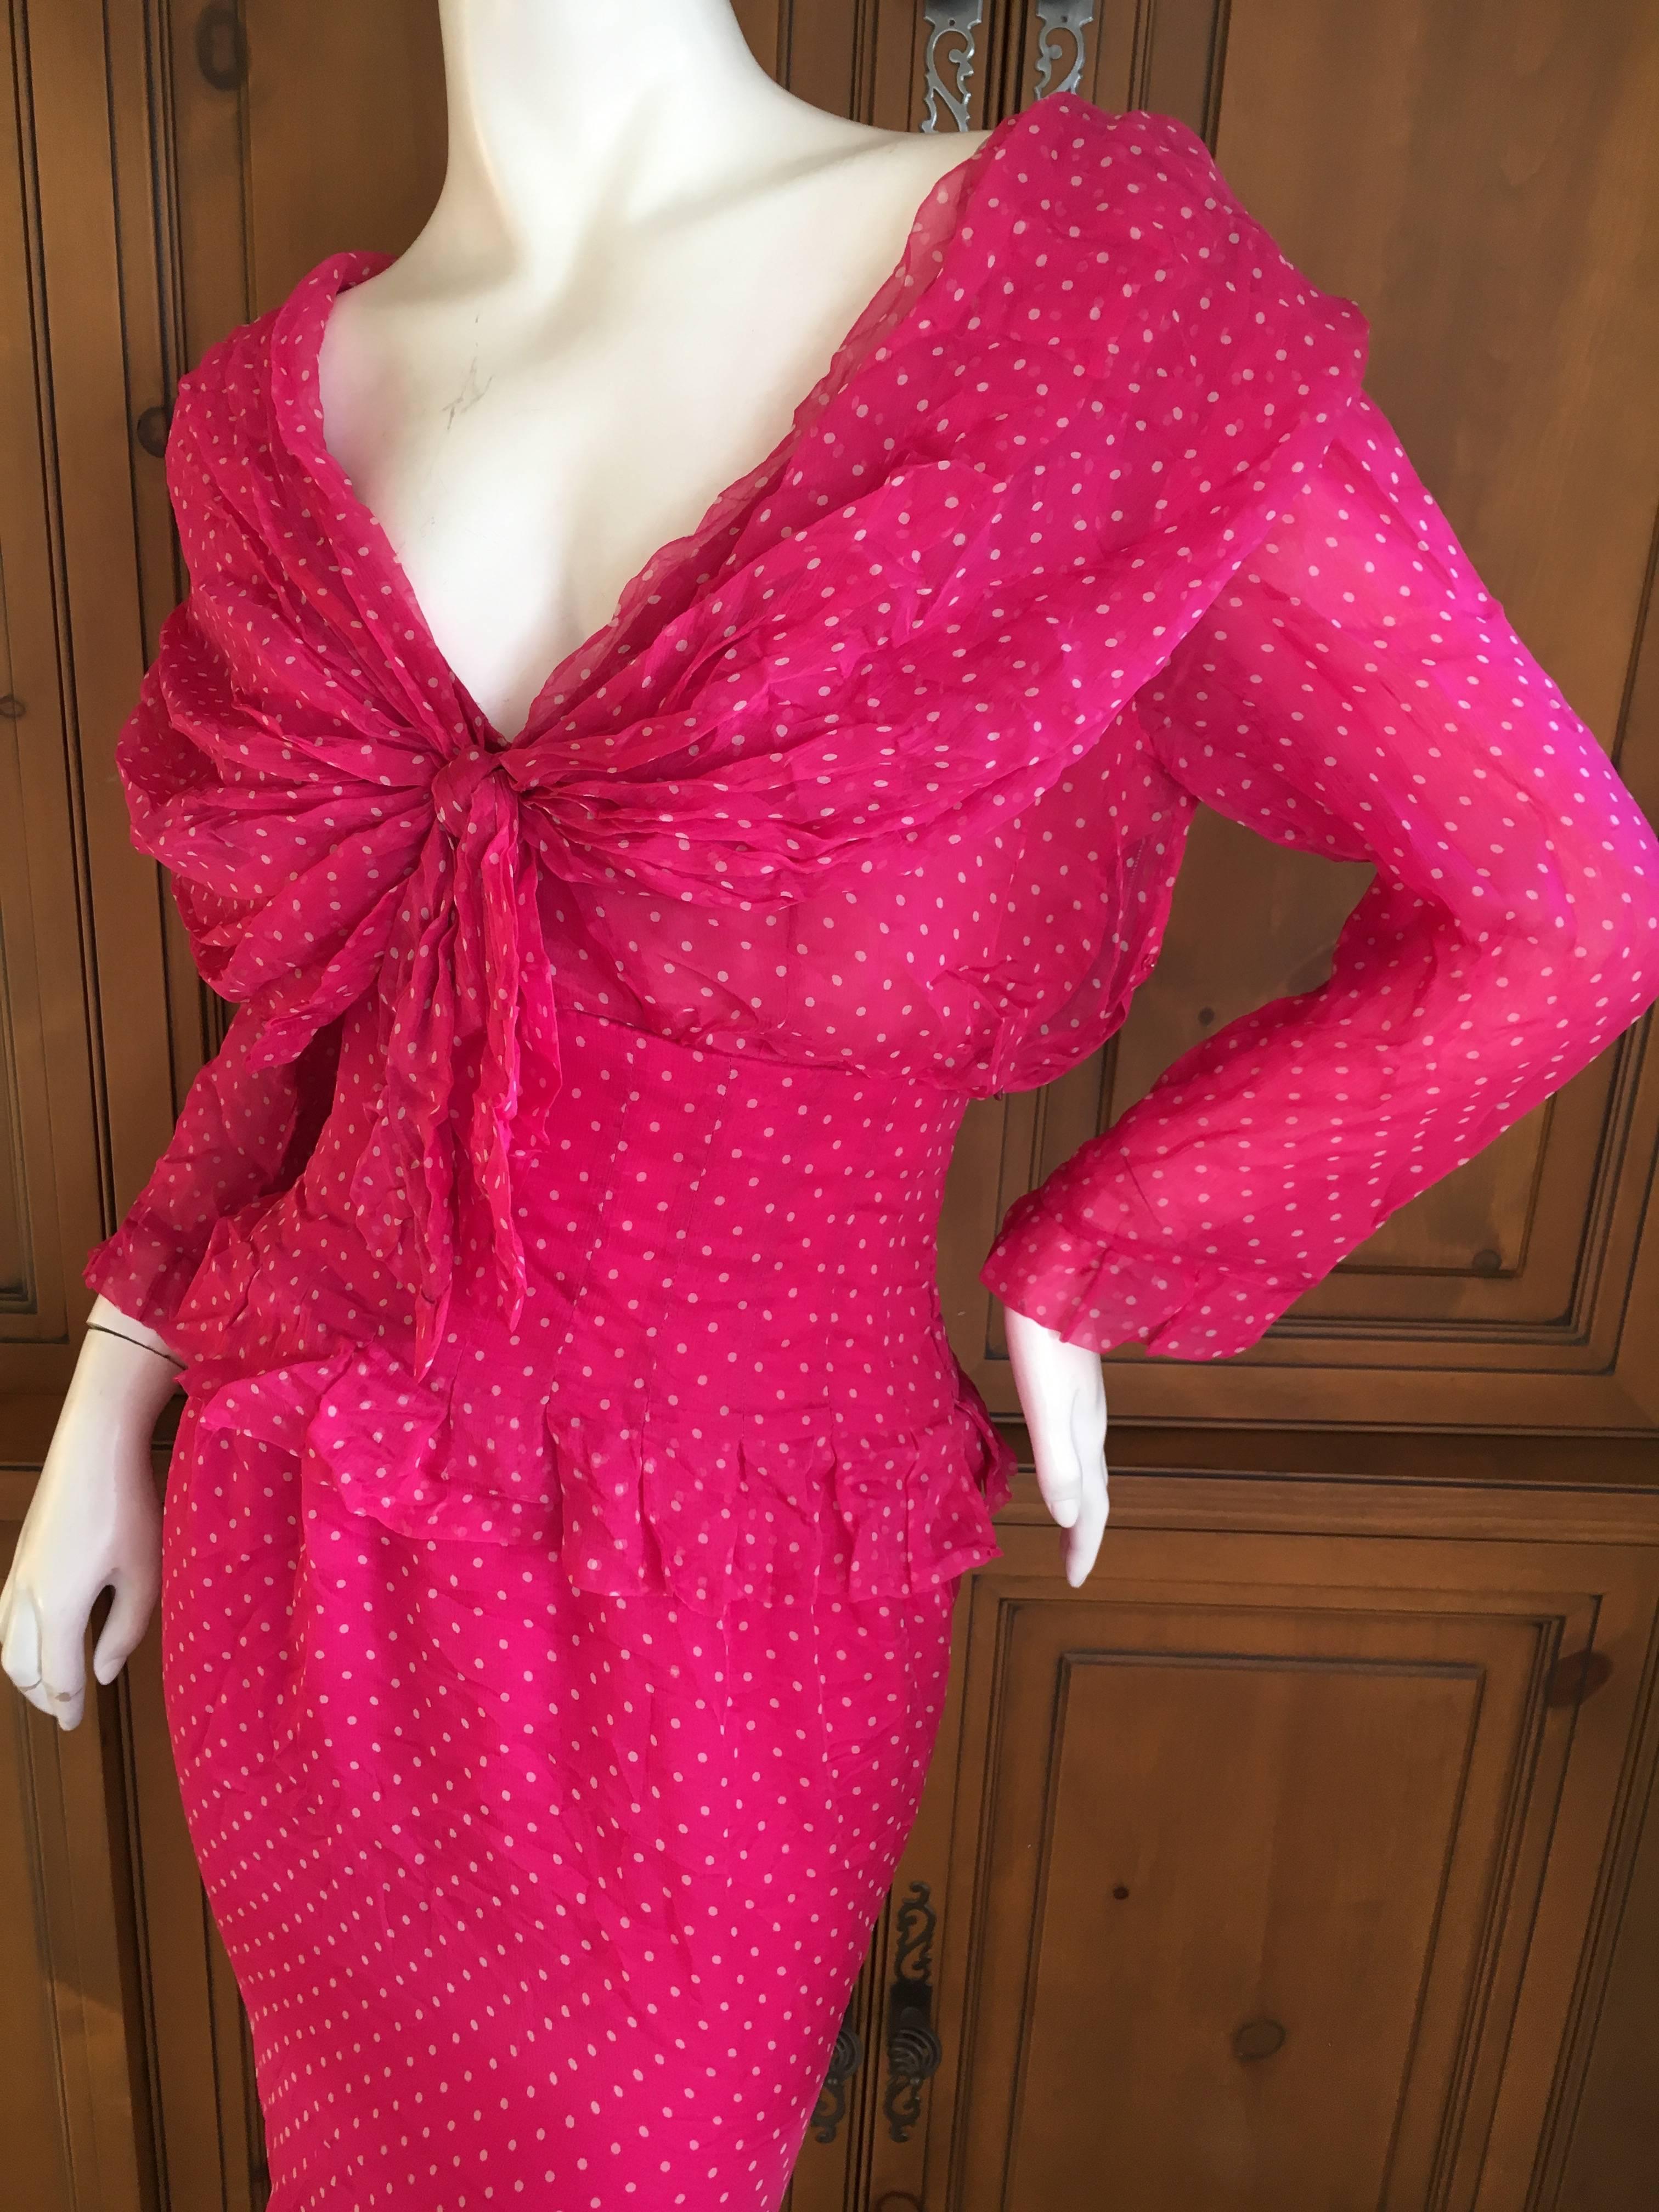 Christian Dior Numbered Haute Couture Silk Chiffon Day Dress Spring 1988 In Excellent Condition For Sale In Cloverdale, CA